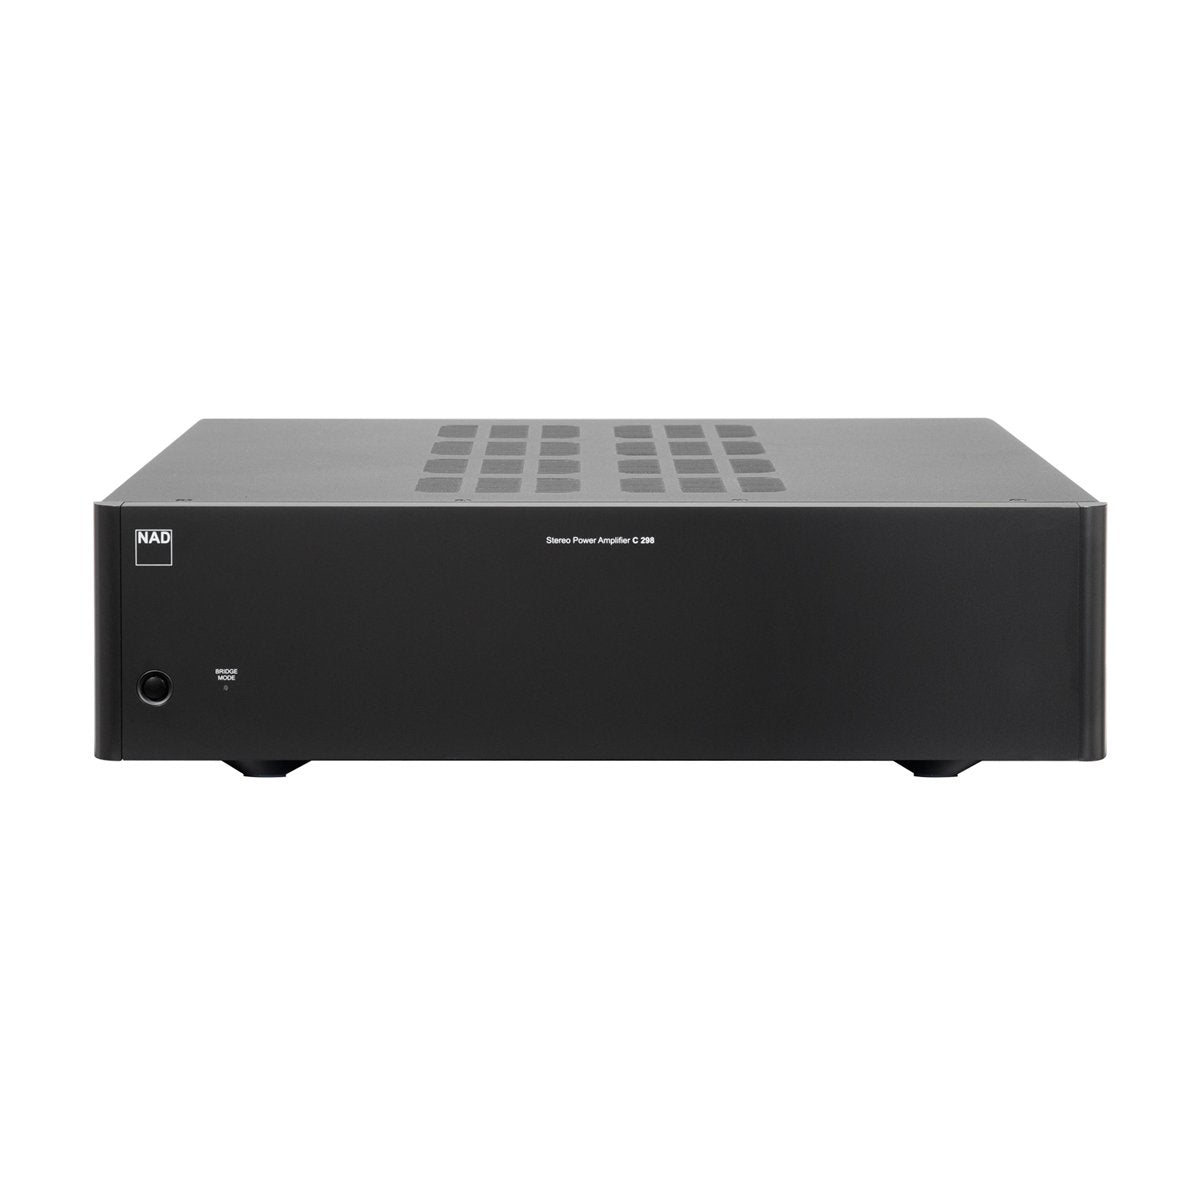 NAD C298 Stereo Power Amplifier - The Audio Experts